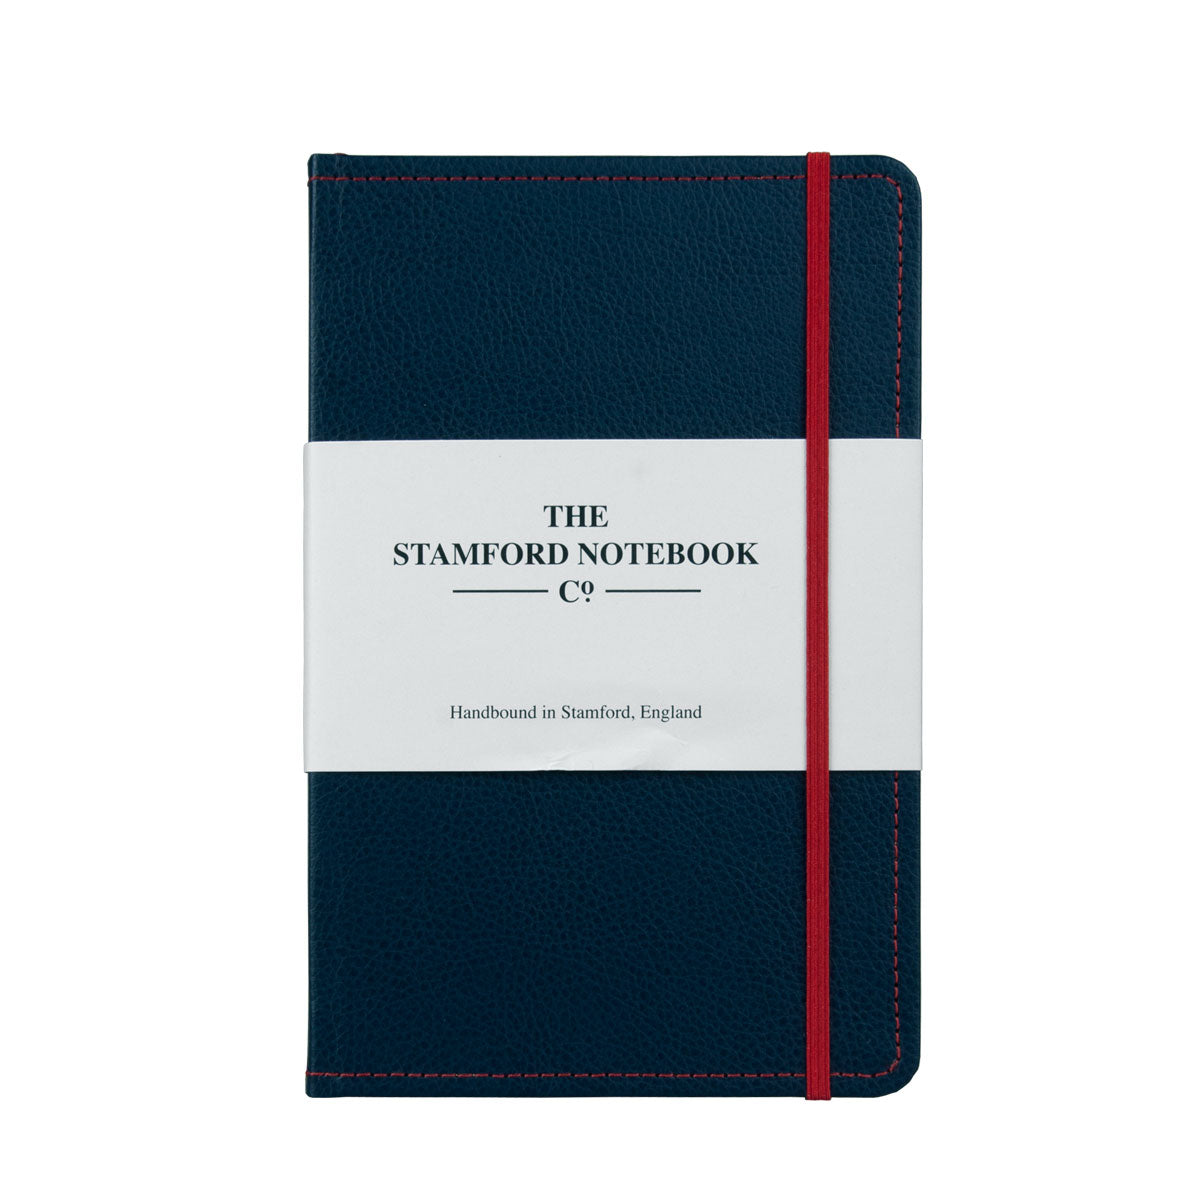 Marine Blue leather notebook with red stitching